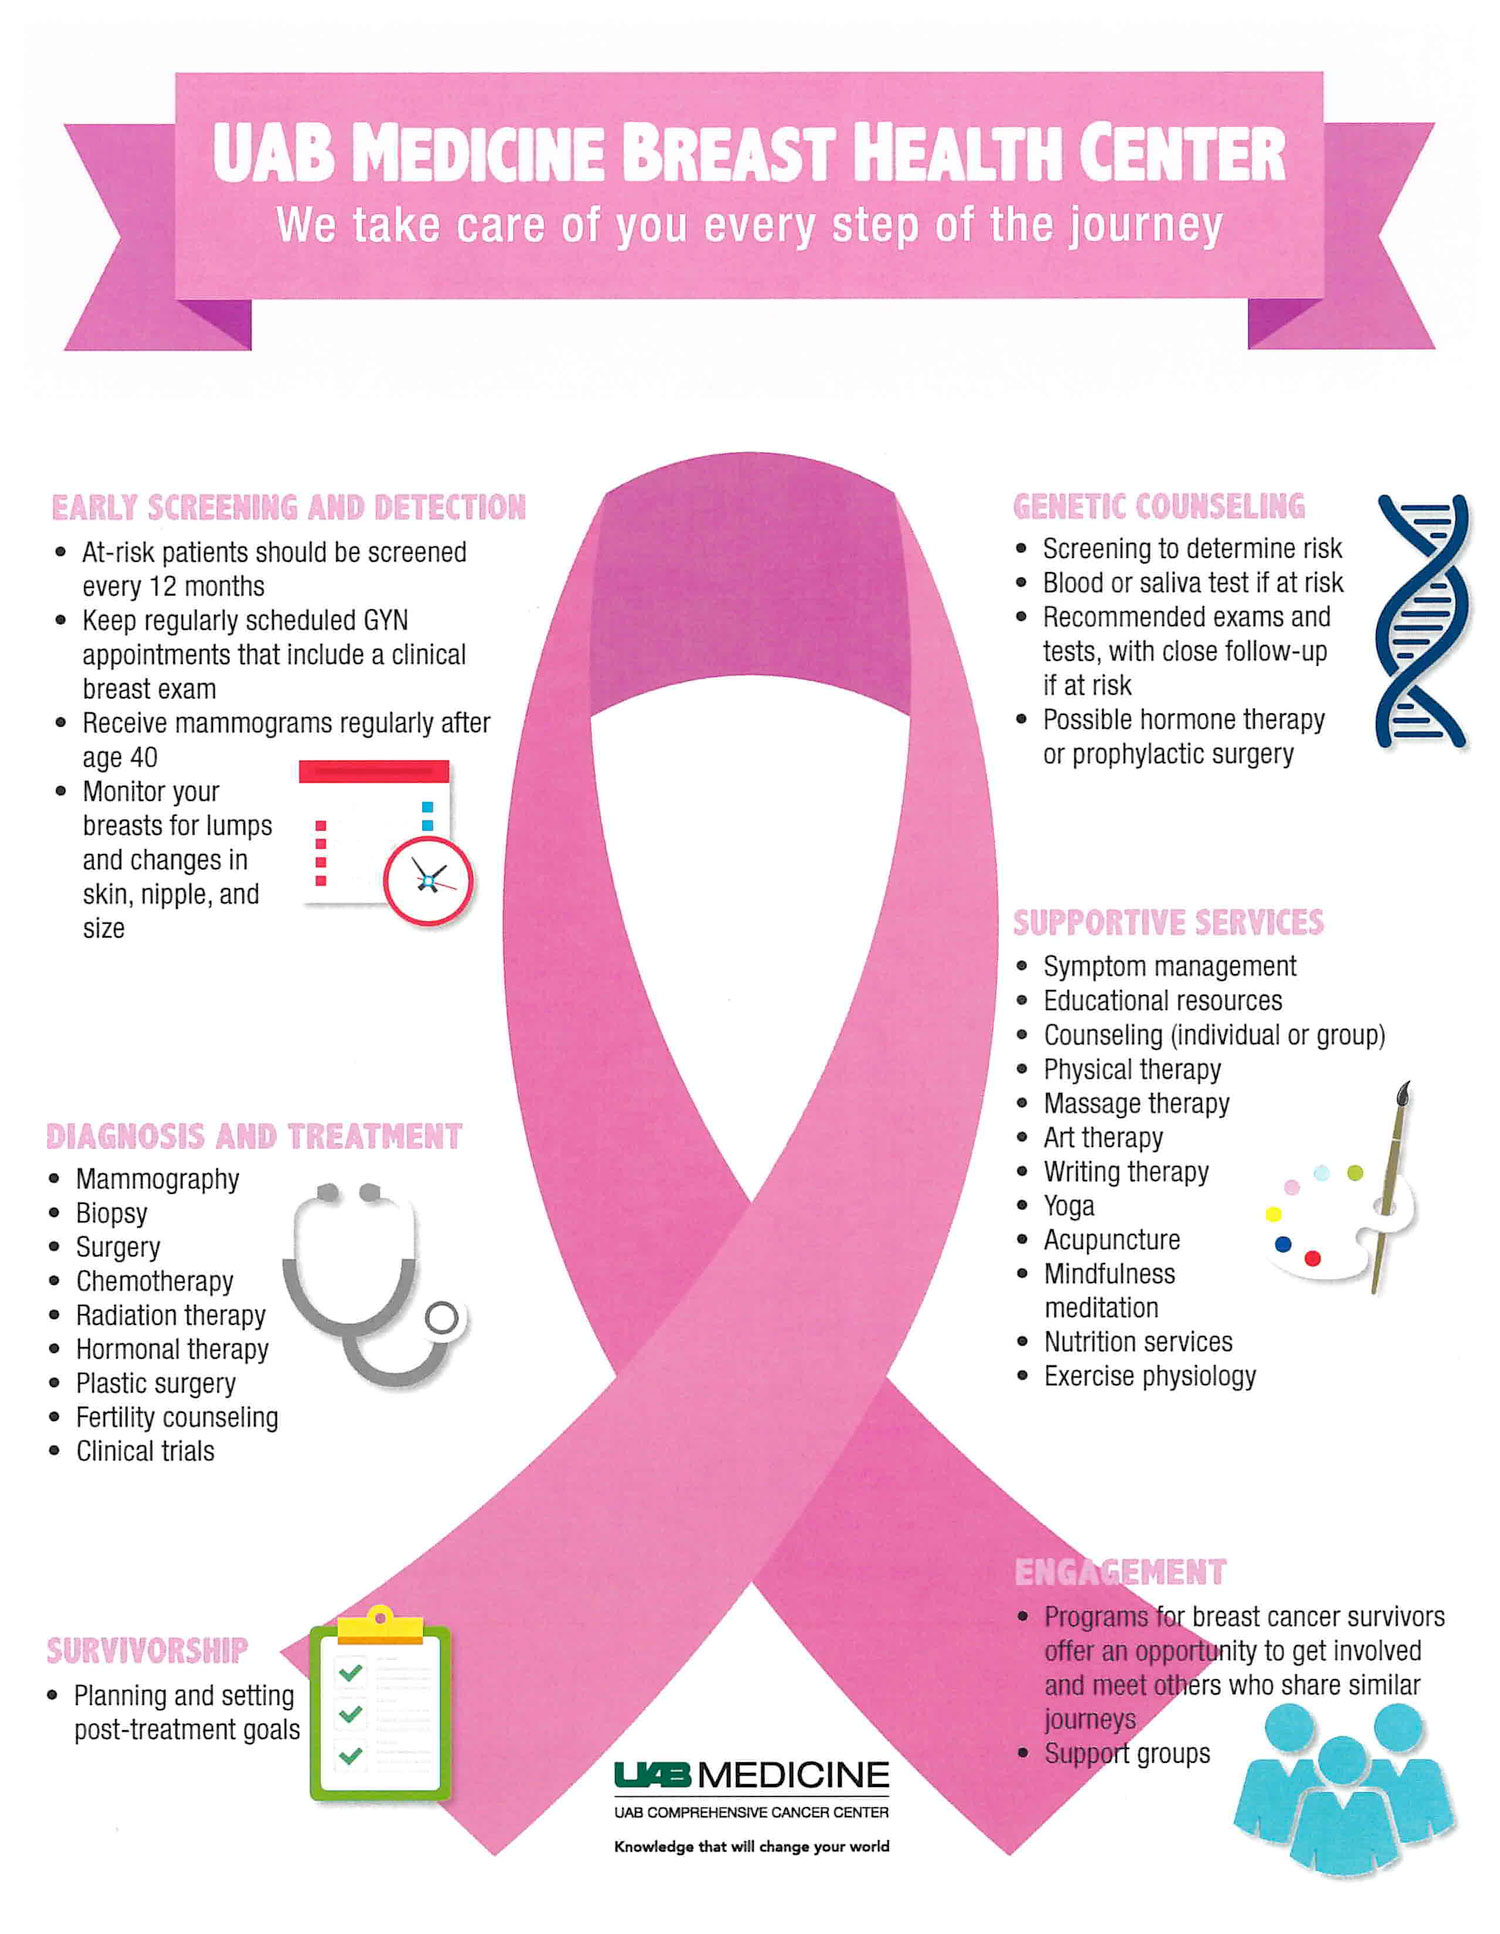 Breast cancer: Early detection saves lives - News